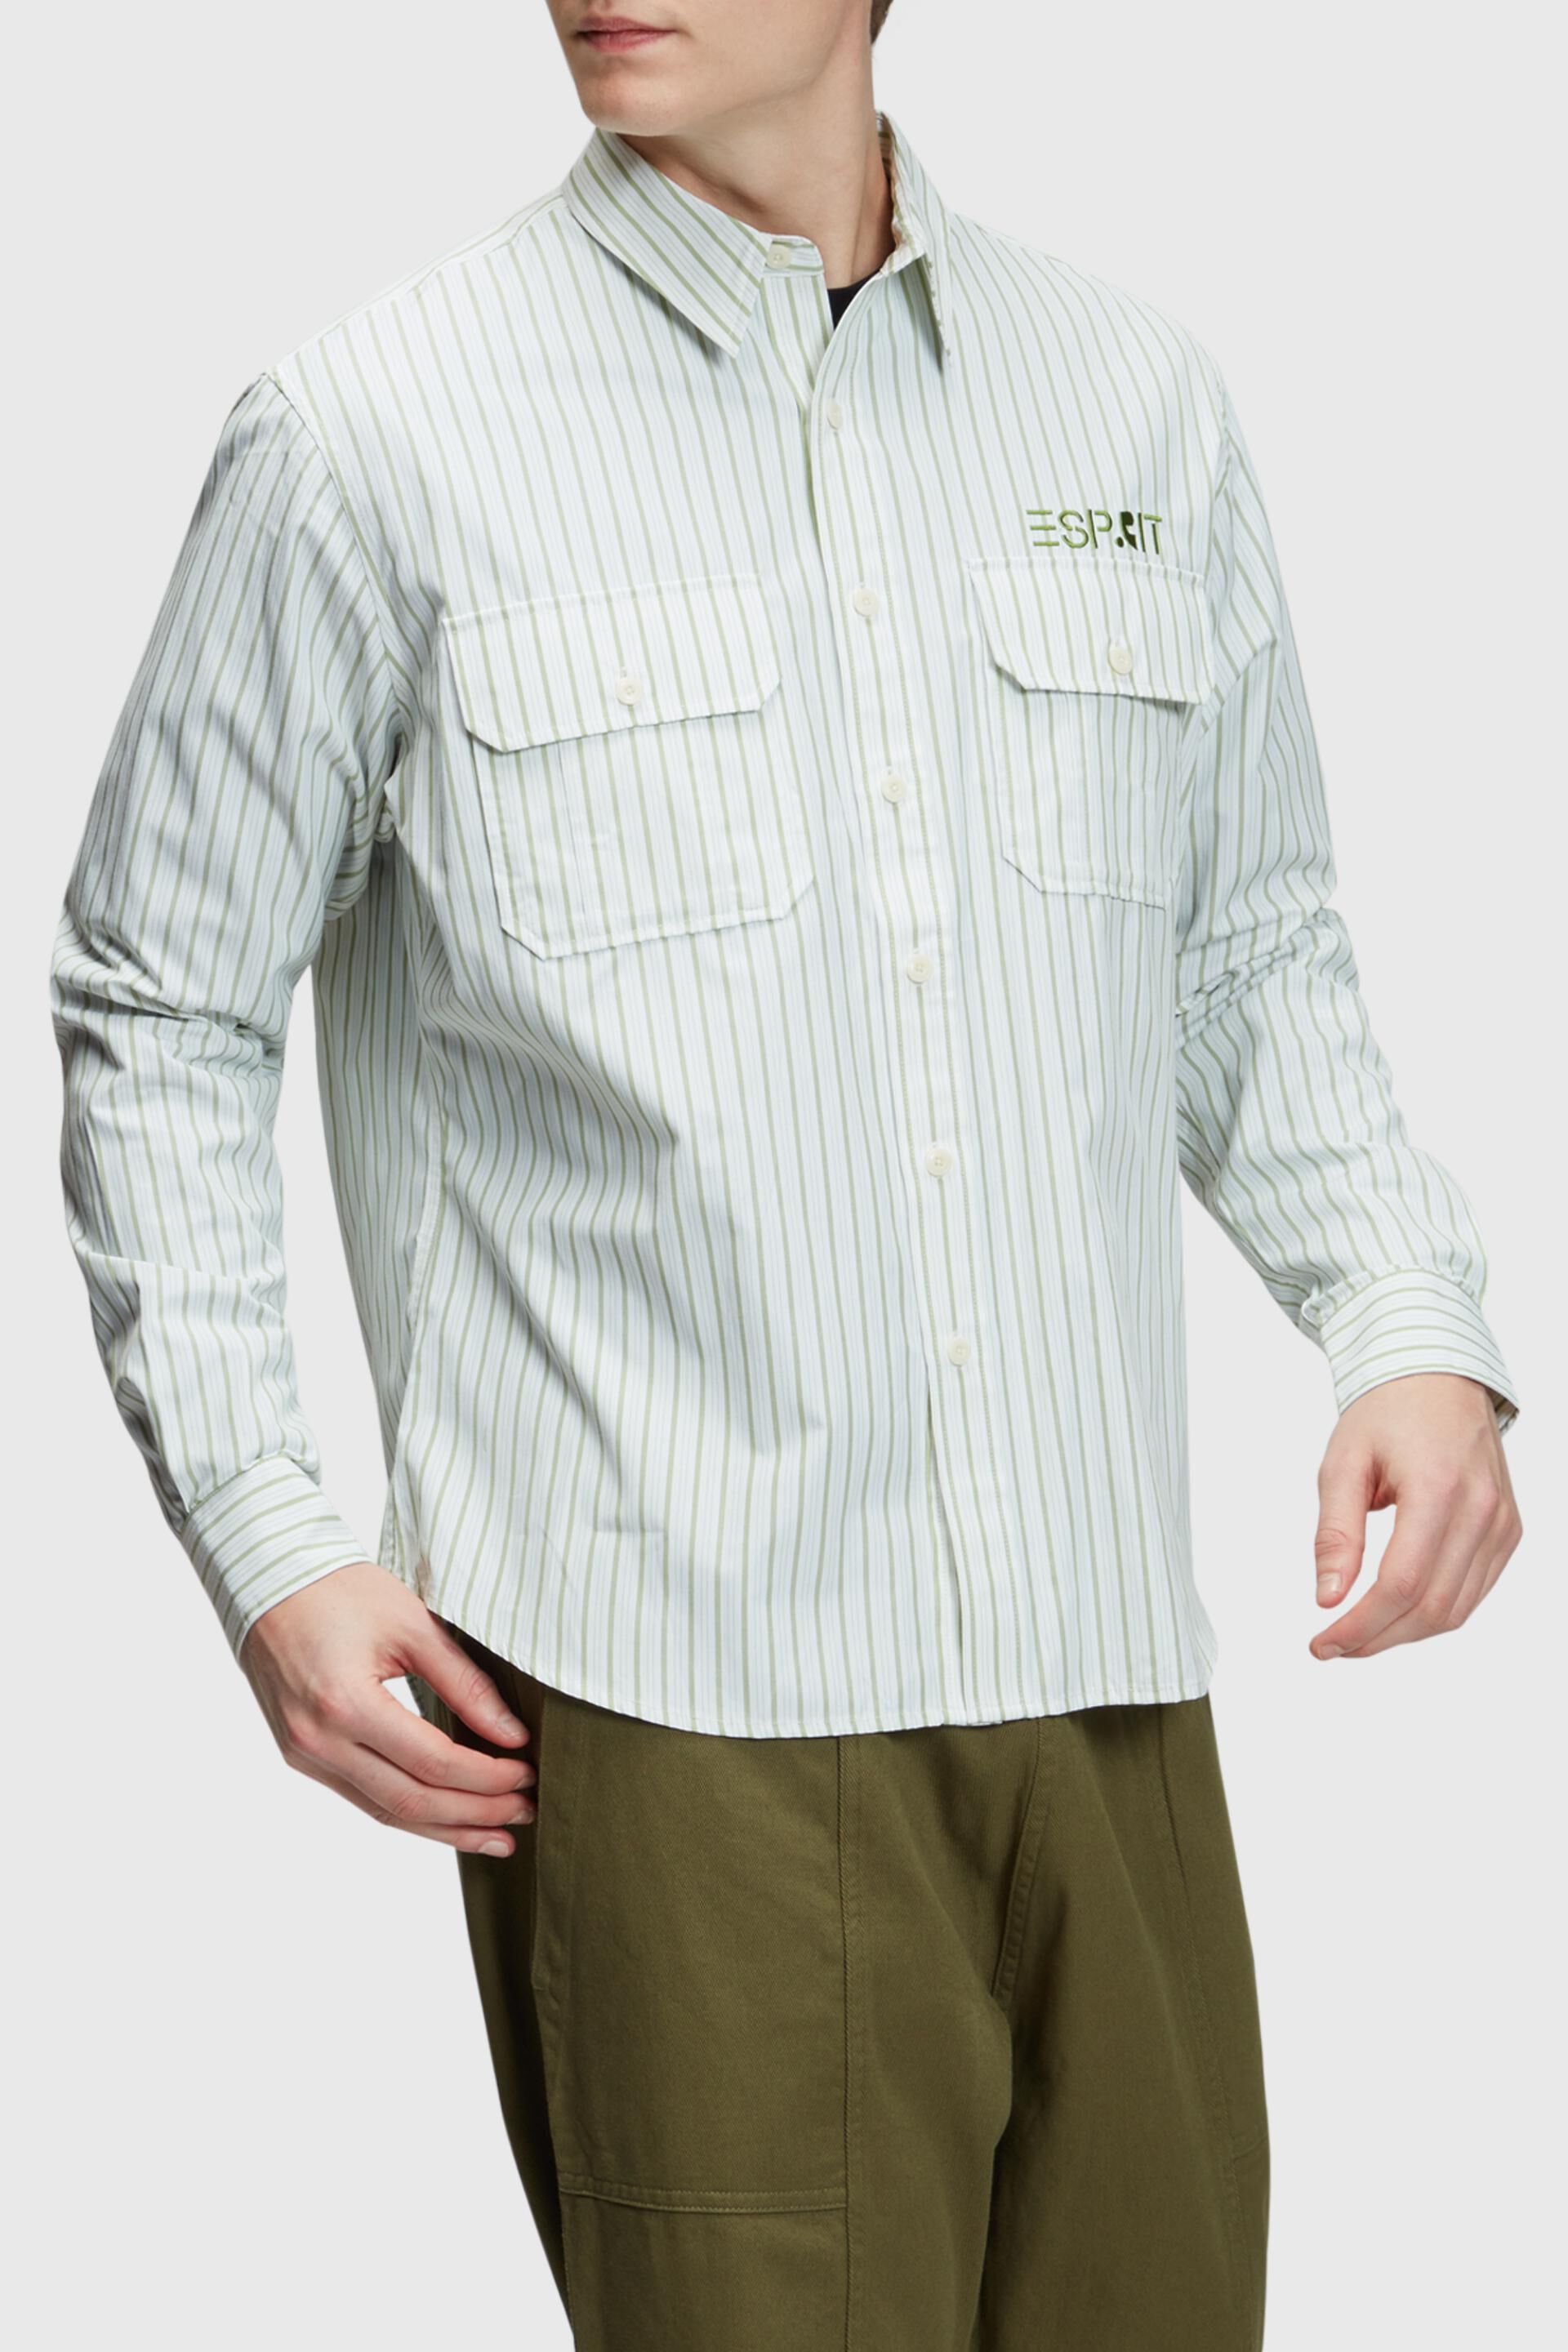 Esprit striped fit Relaxed shirt